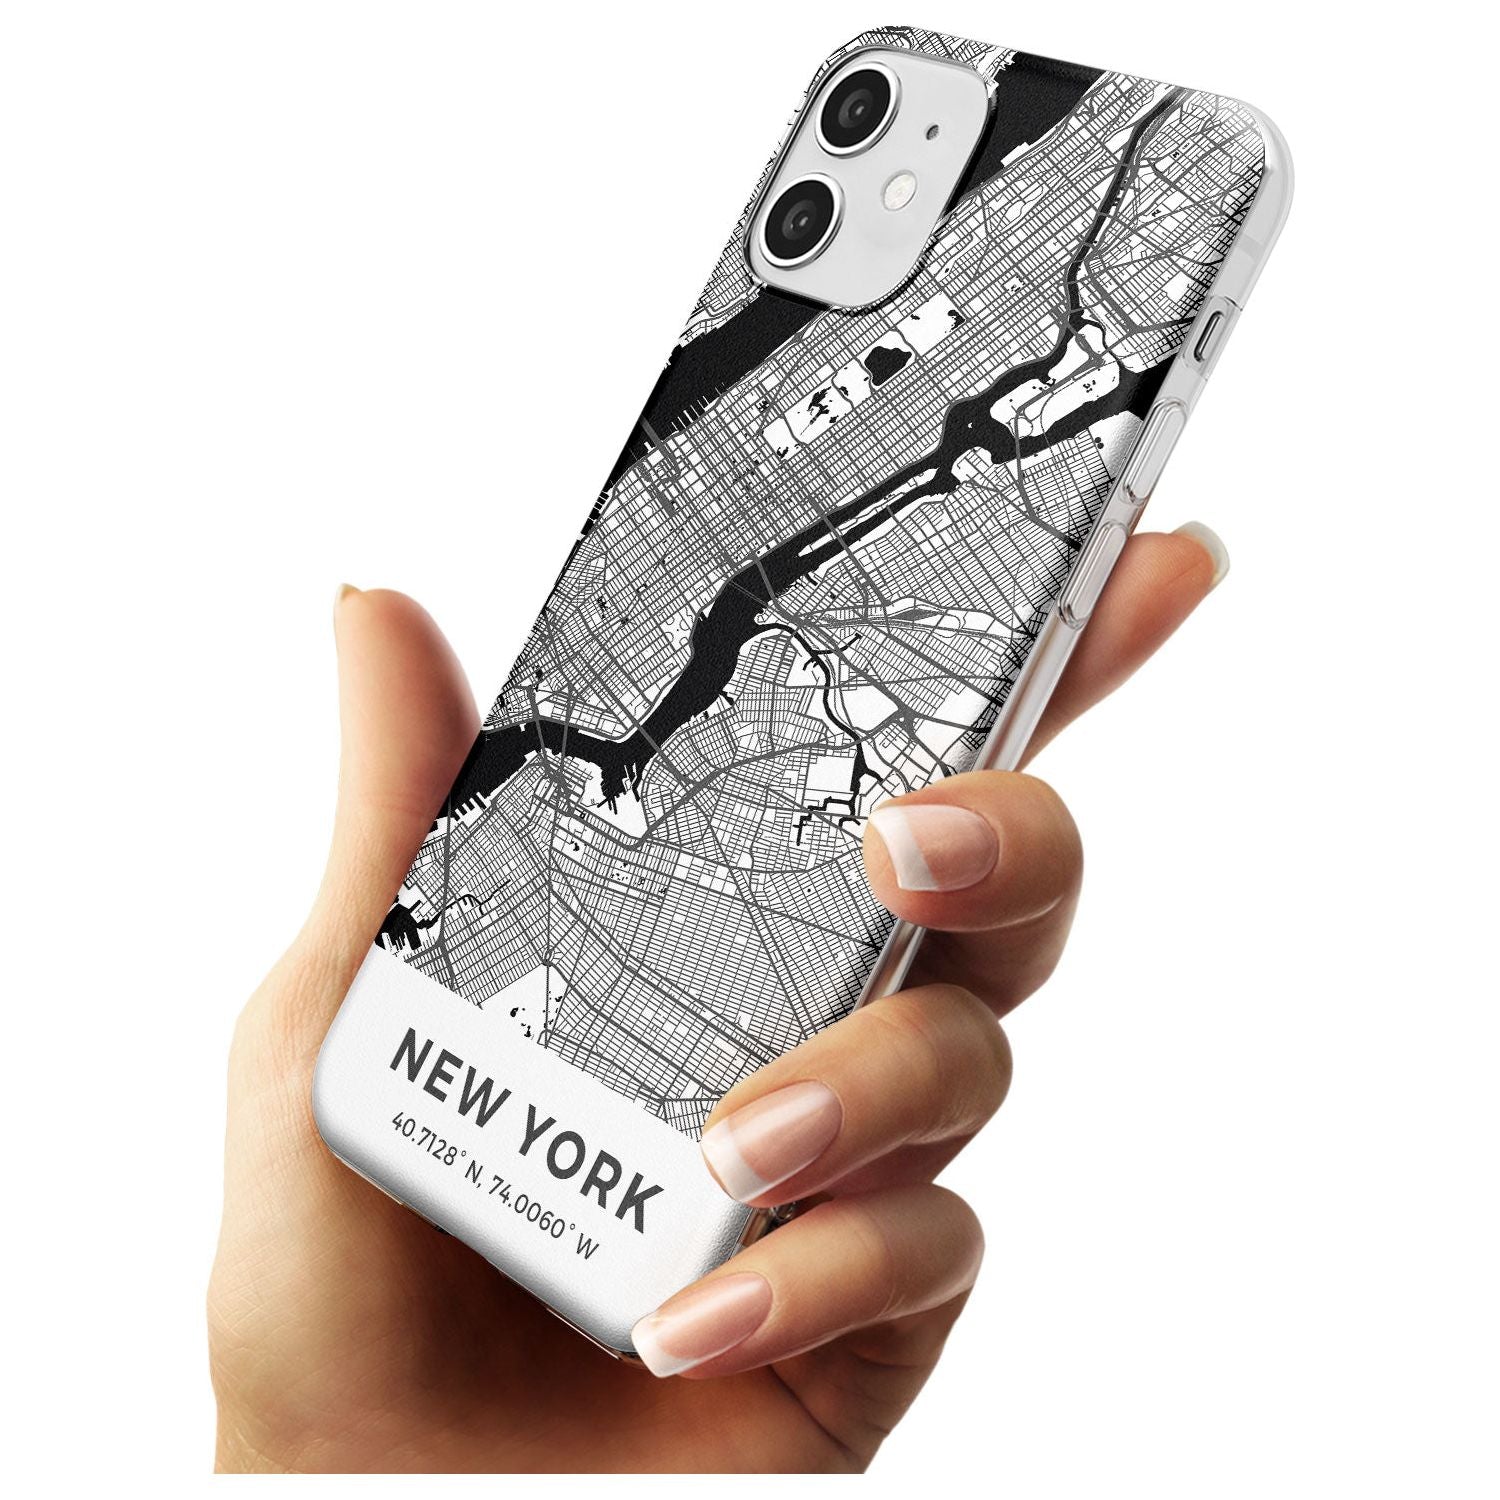 Map of New York, New York Slim TPU Phone Case for iPhone 11